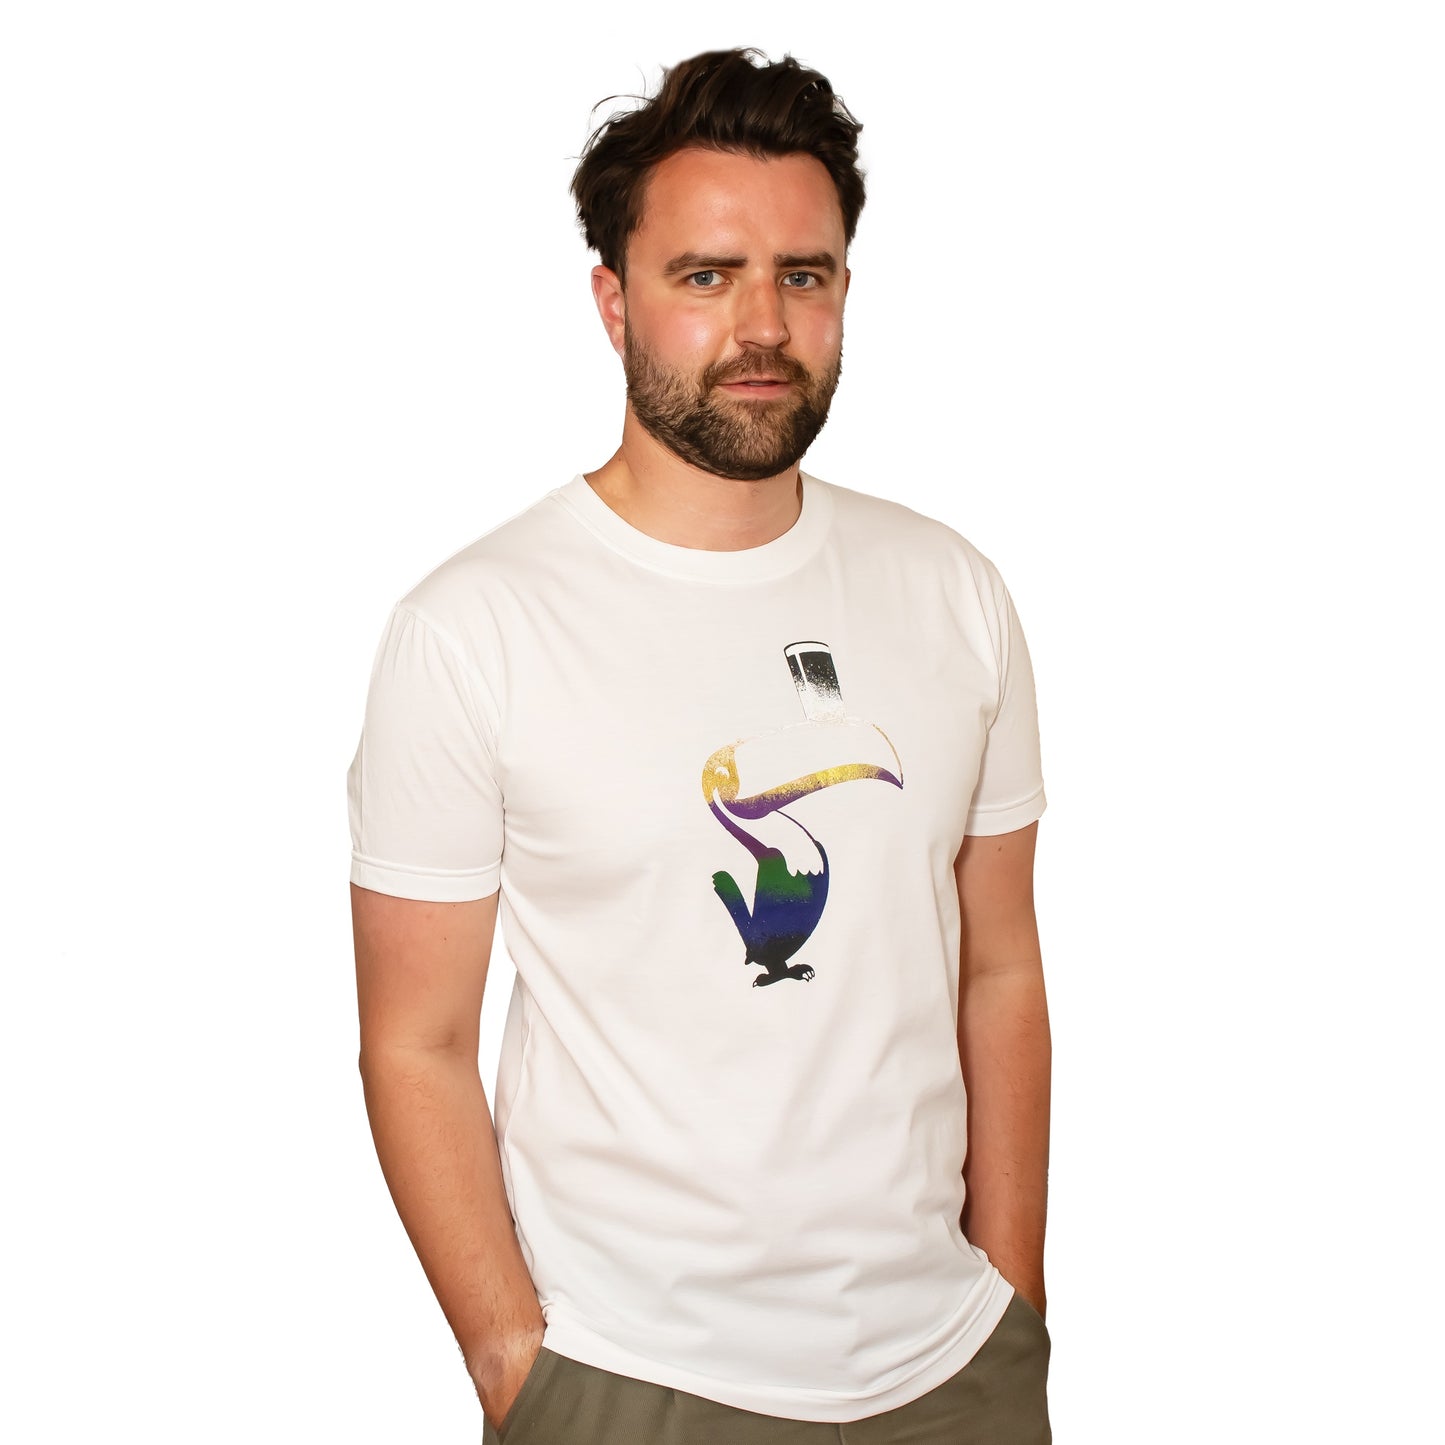 Man wearing a white Guinness Liquid Toucan Tee, standing against a white background, looking slightly to the side.